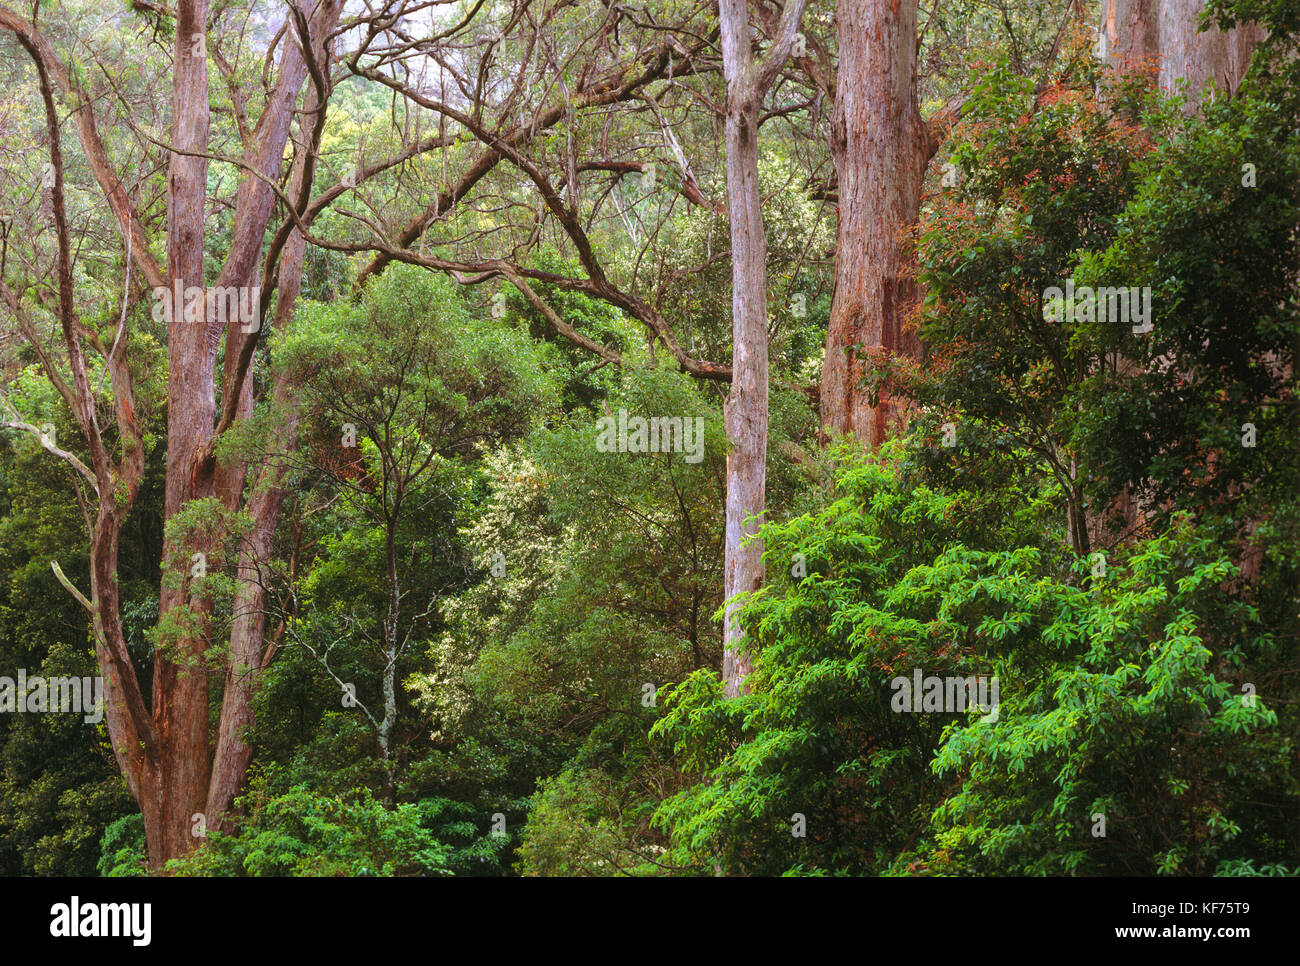 Tall open eucalypt forest with rainforest understorey. Macquarie Pass National Park, New South Wales, Australia Stock Photo